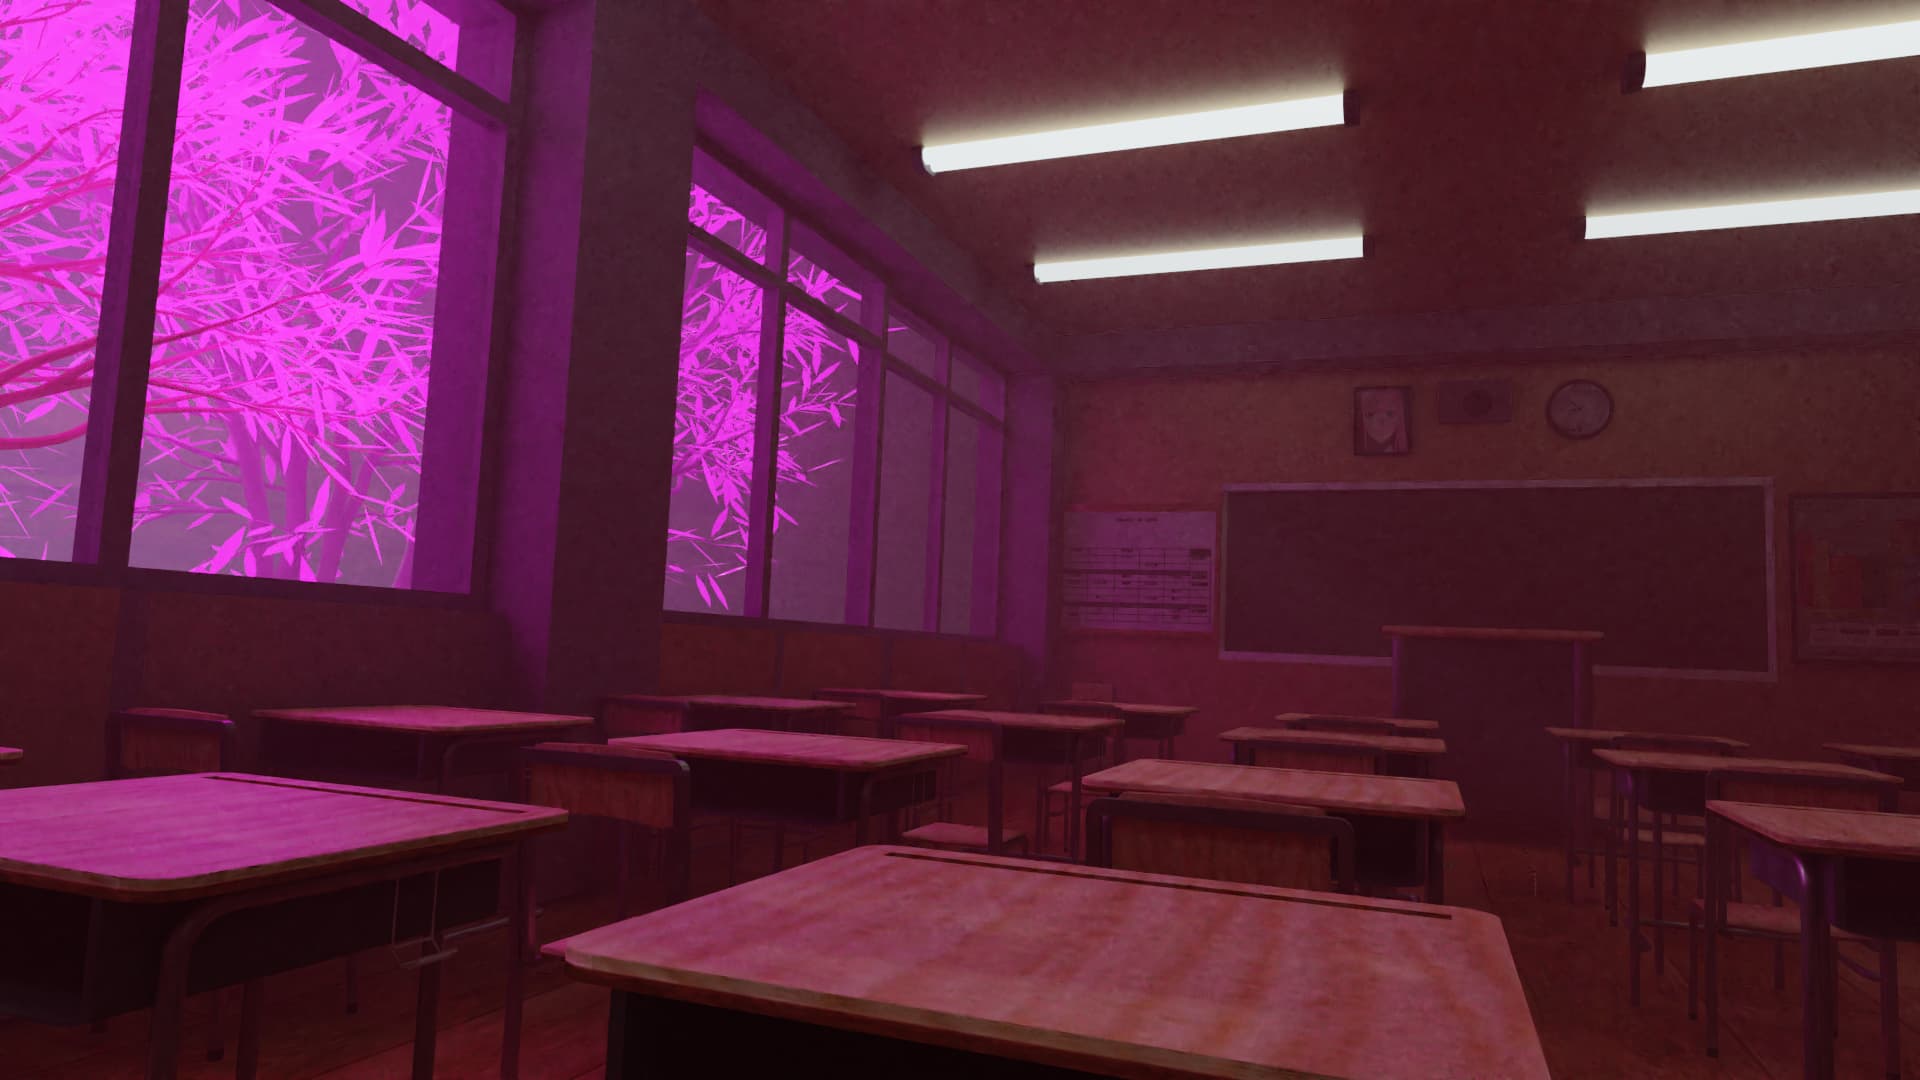 Anime Classroom Environment - Finished Projects - Blender Artists Community